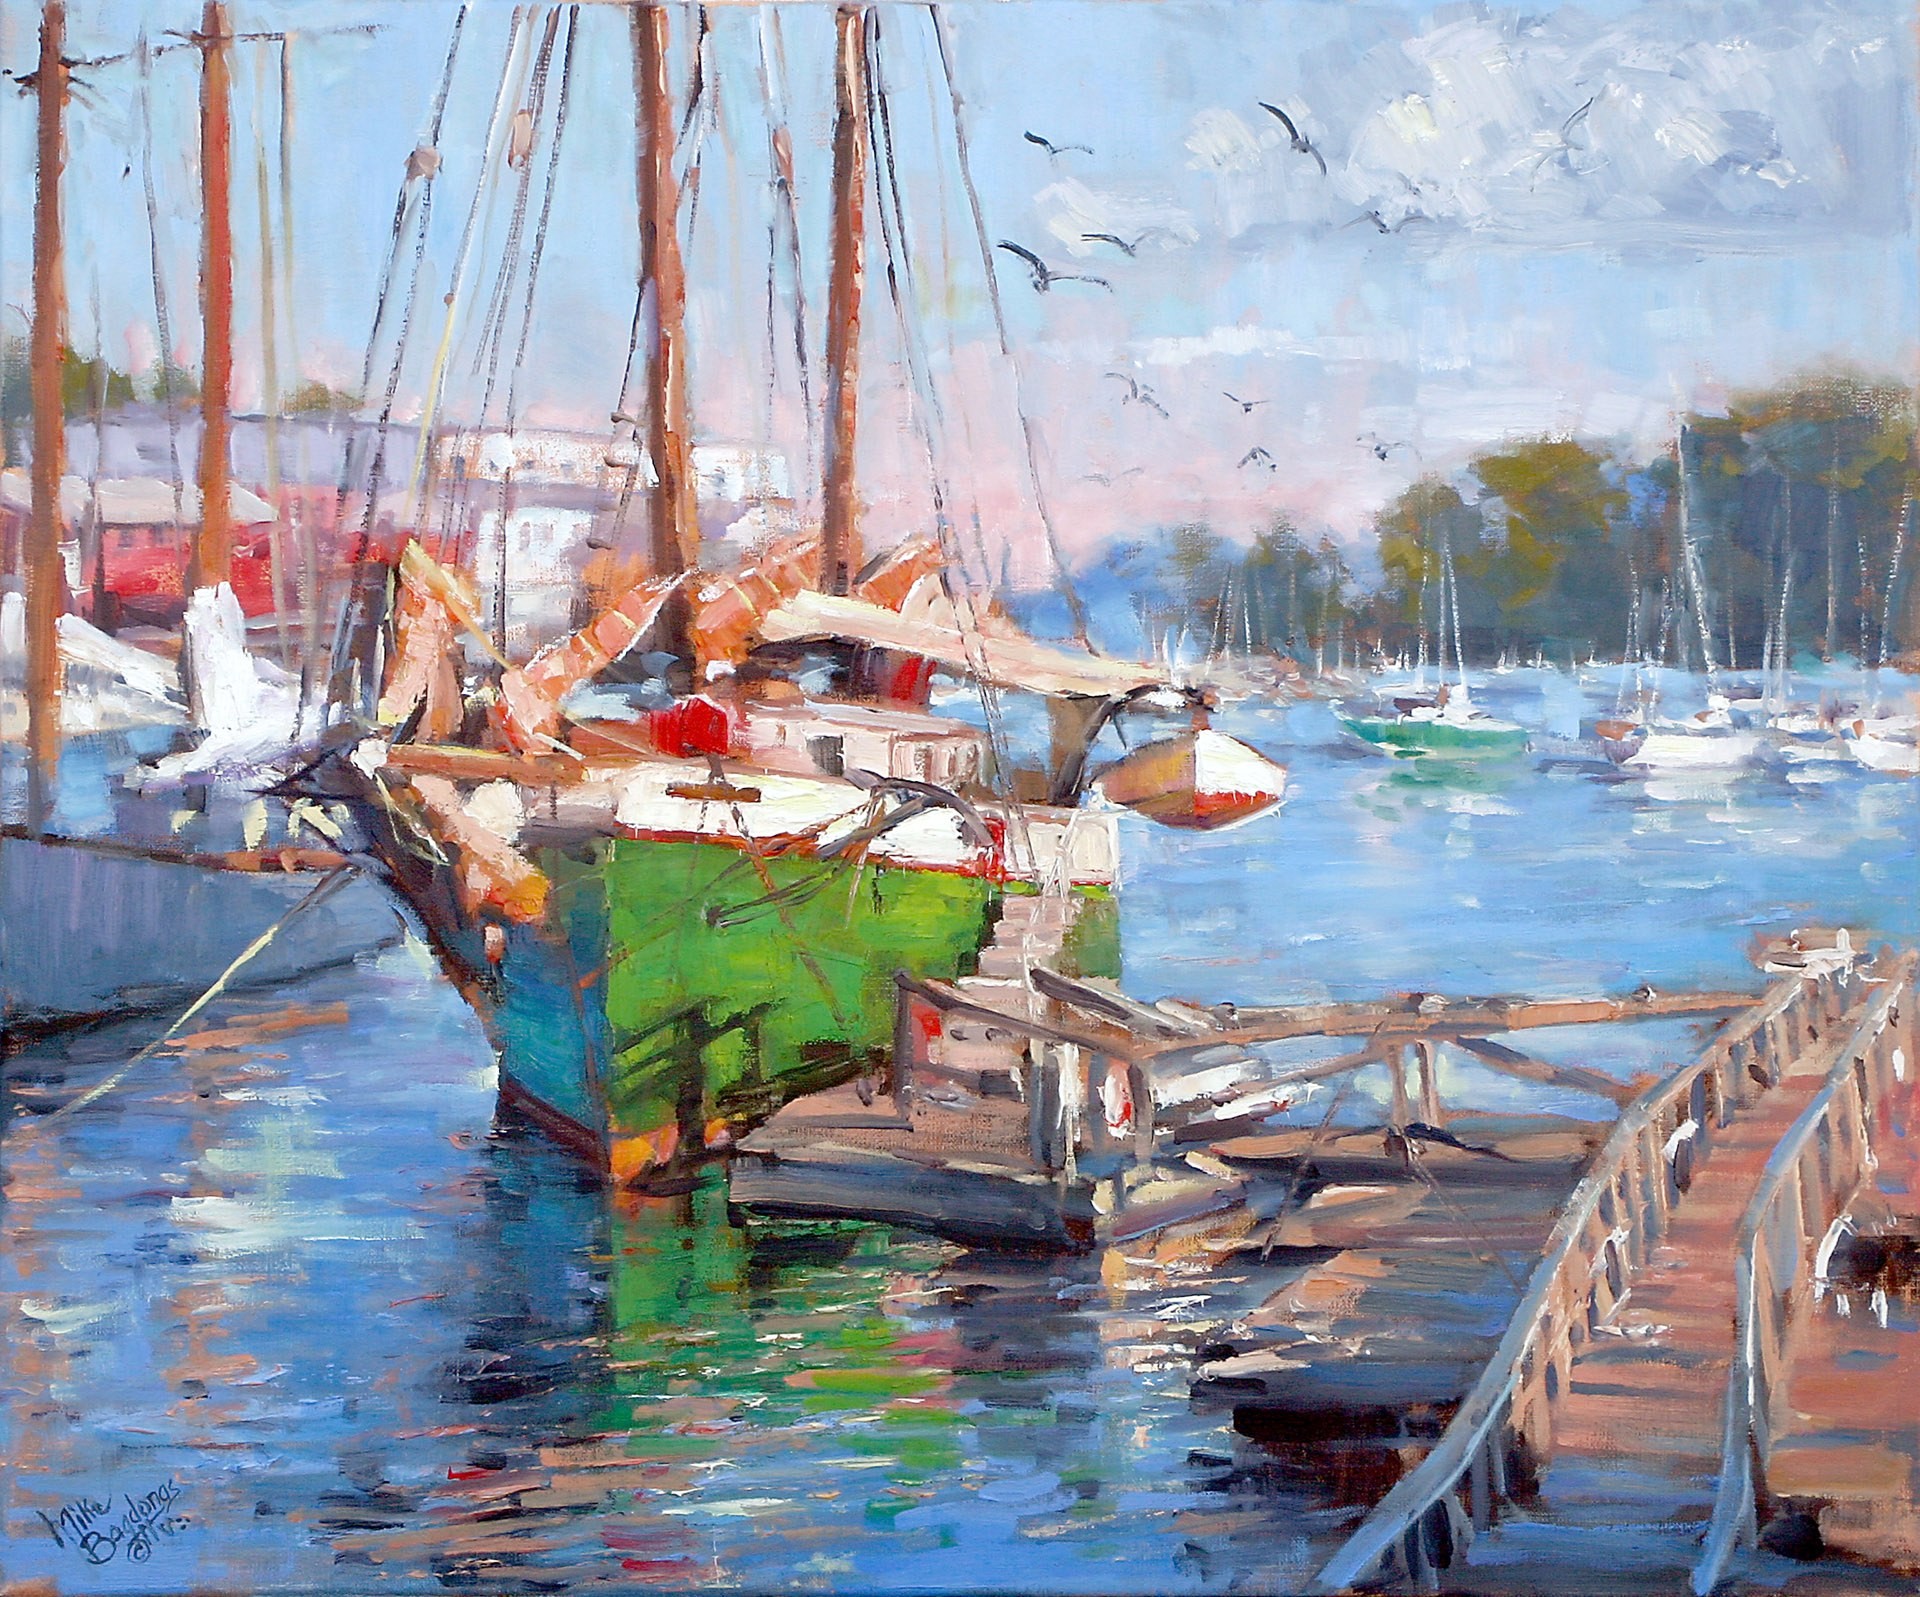 13th Annual PleinAir Salon Annual Competition Top 25 Finalist Mike Bagdonas Camden Windjammer Boat in Marina Oil Painting